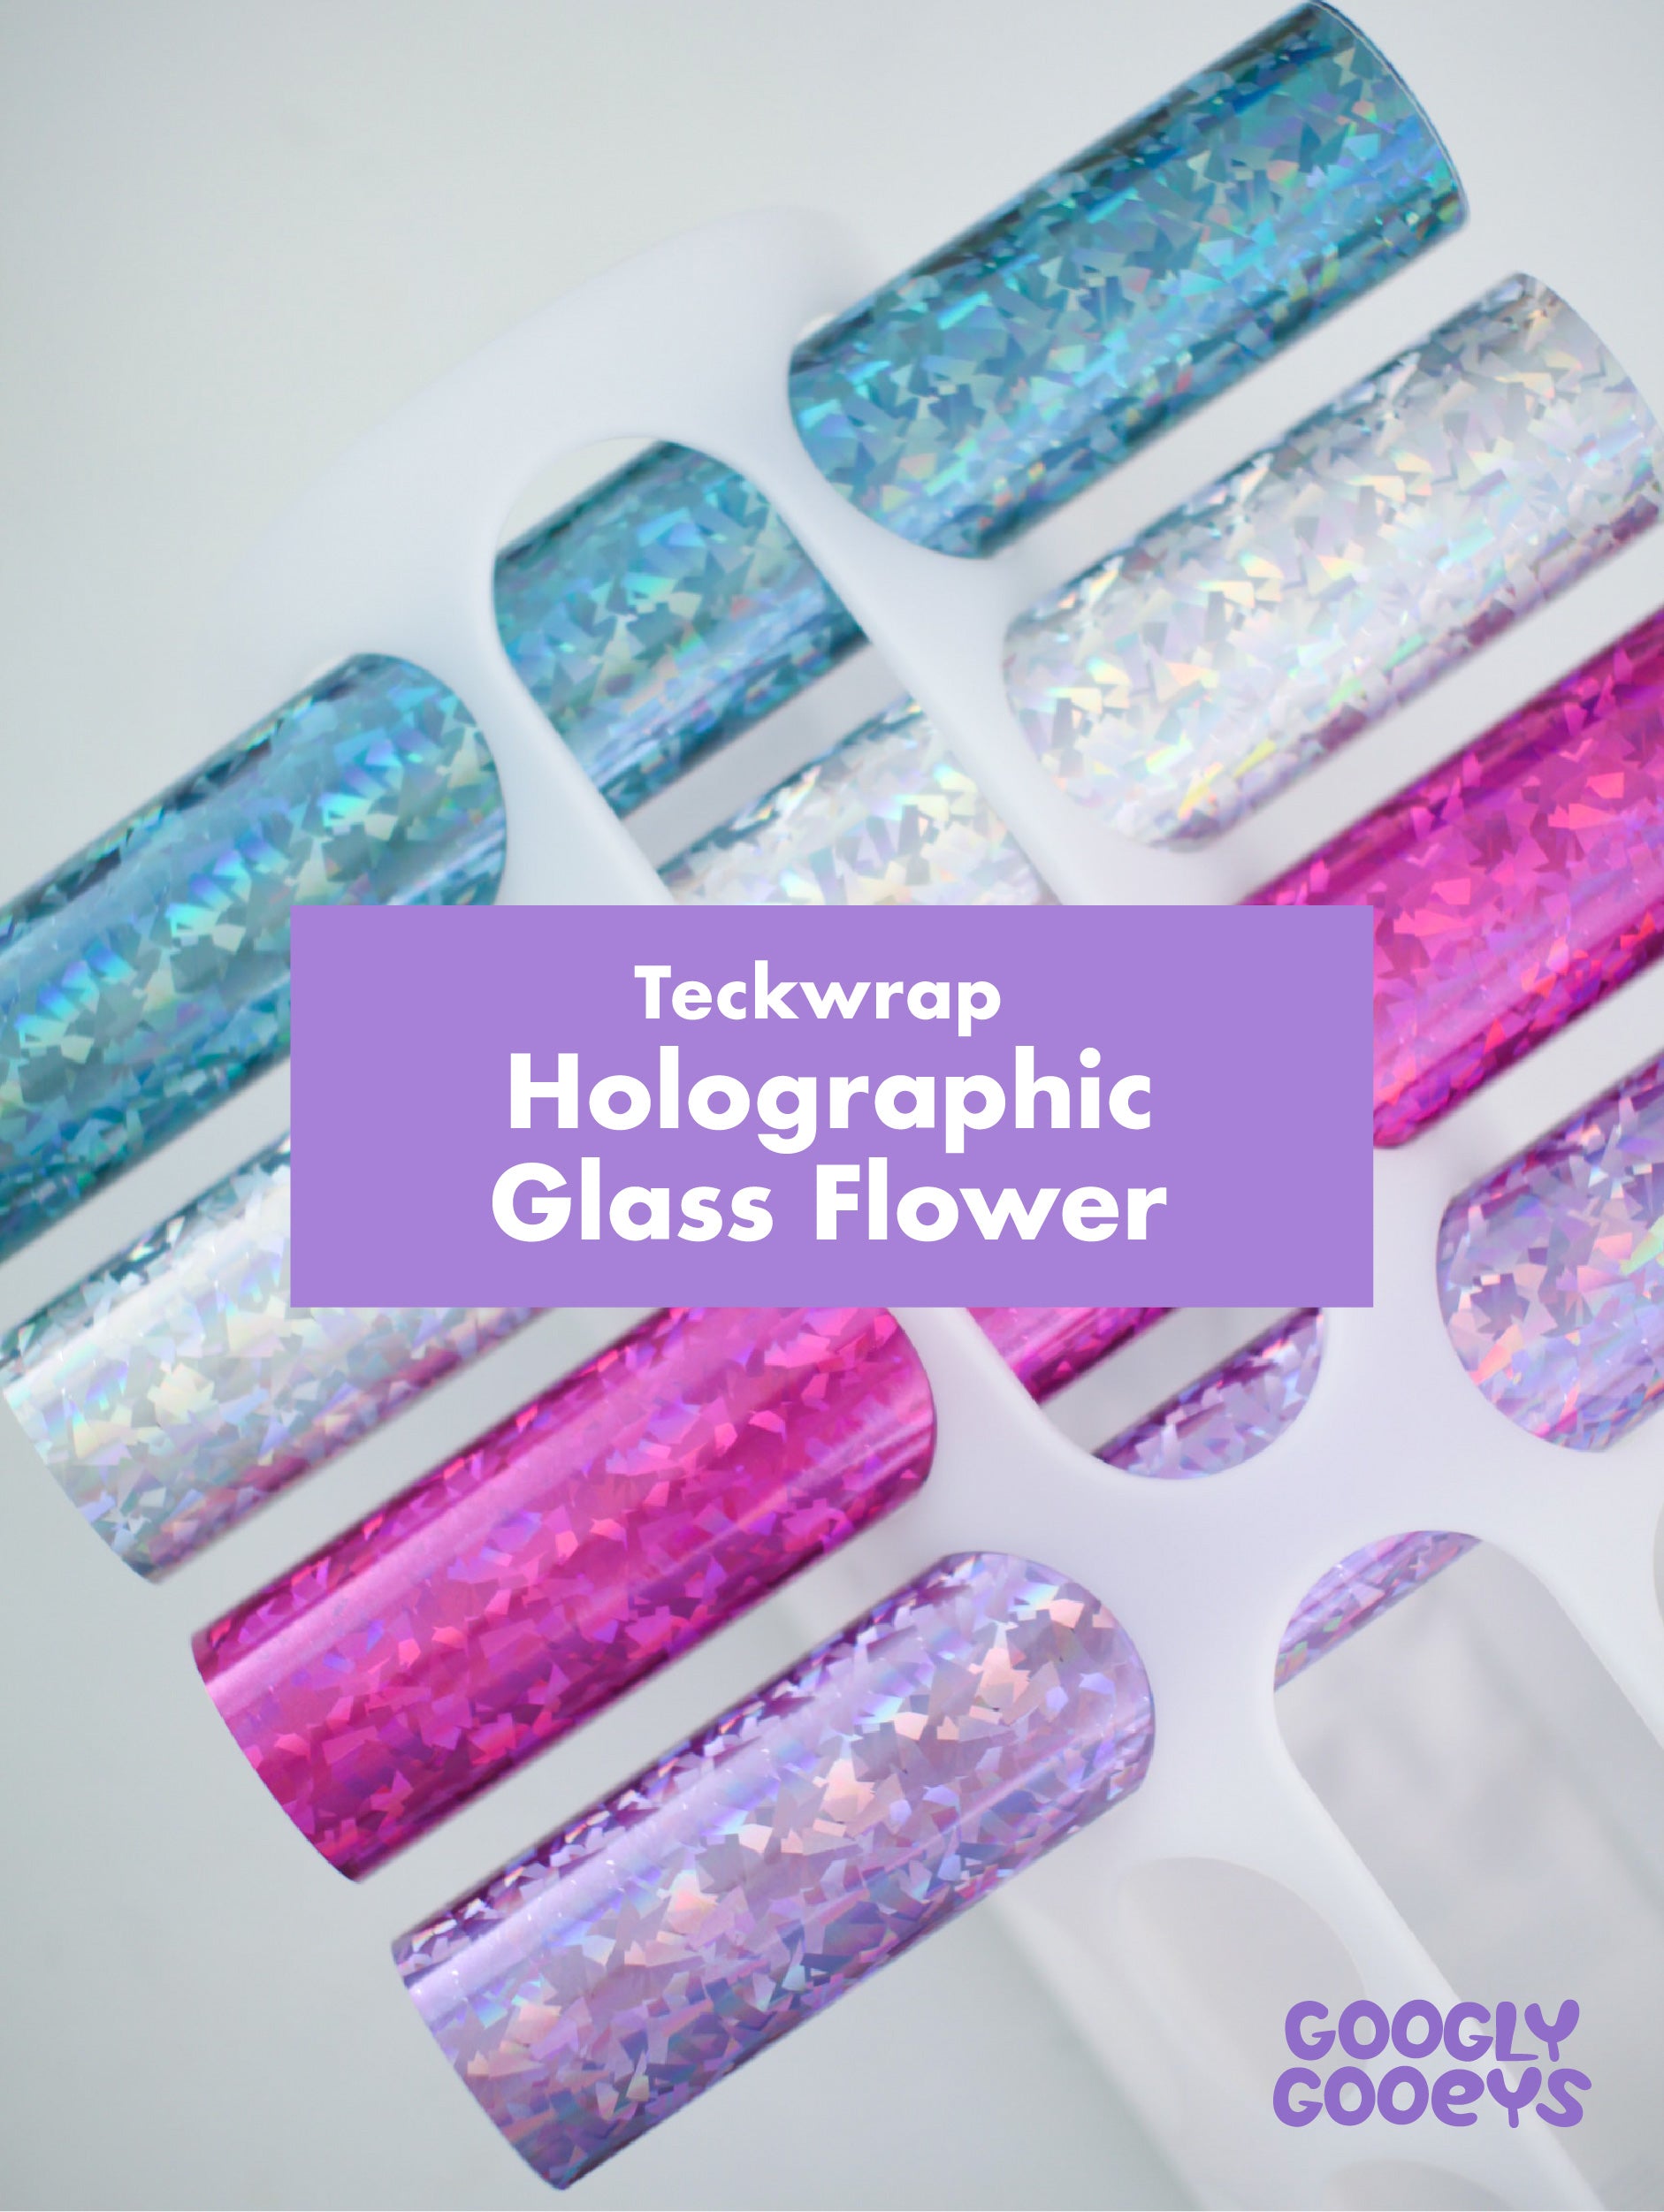 Teckwrap Holographic Glass Flower Adhesive Vinyl Stickers